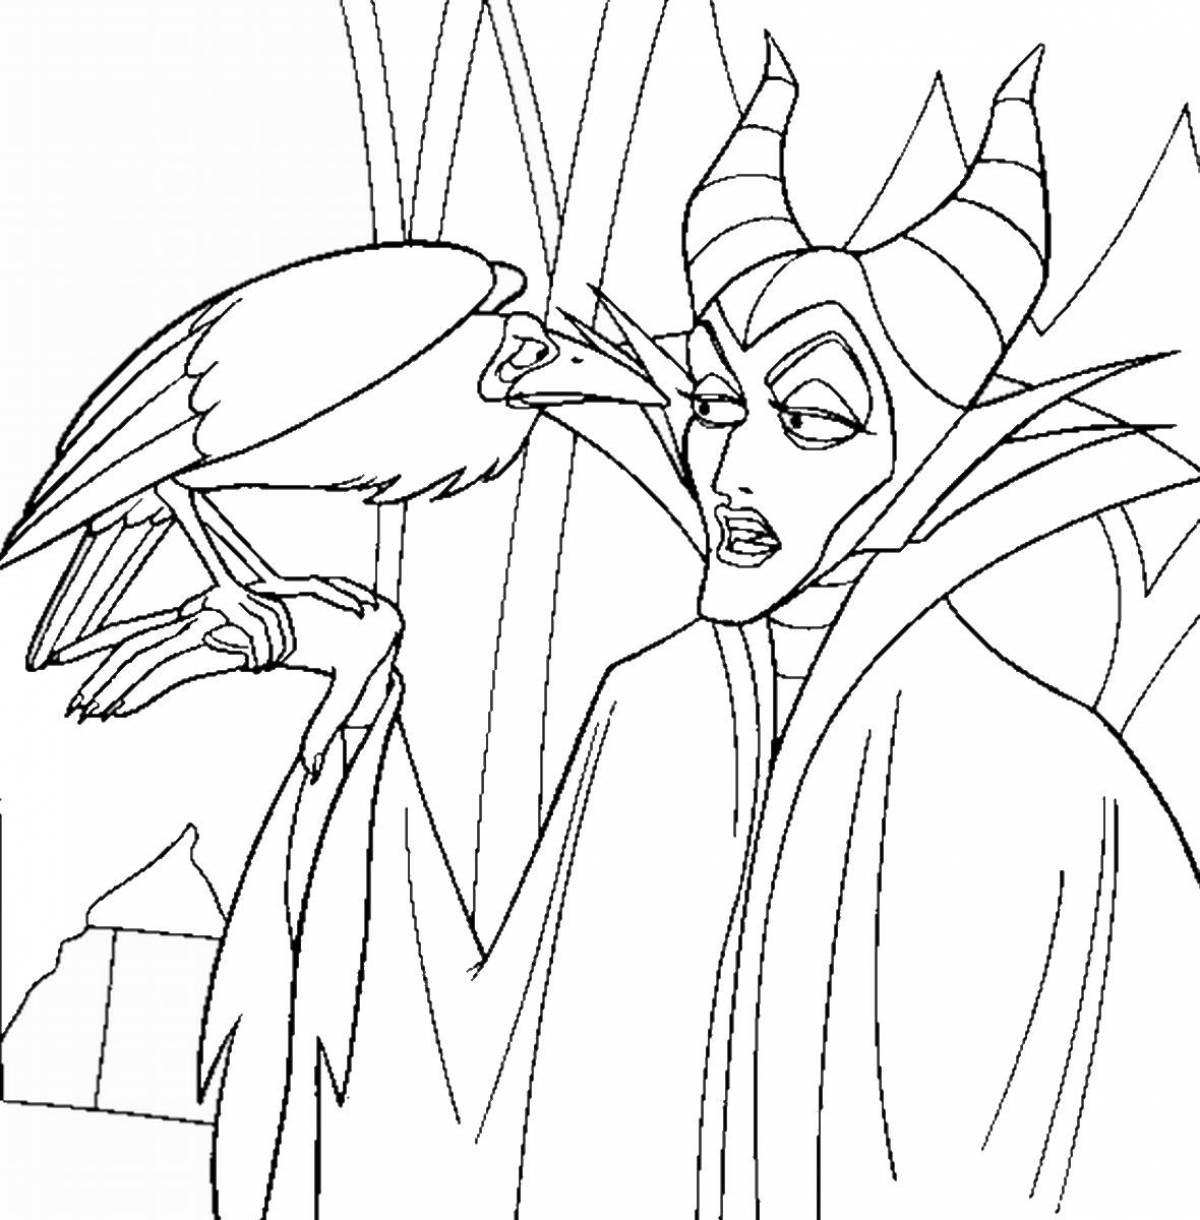 Coloring dazzling maleficent